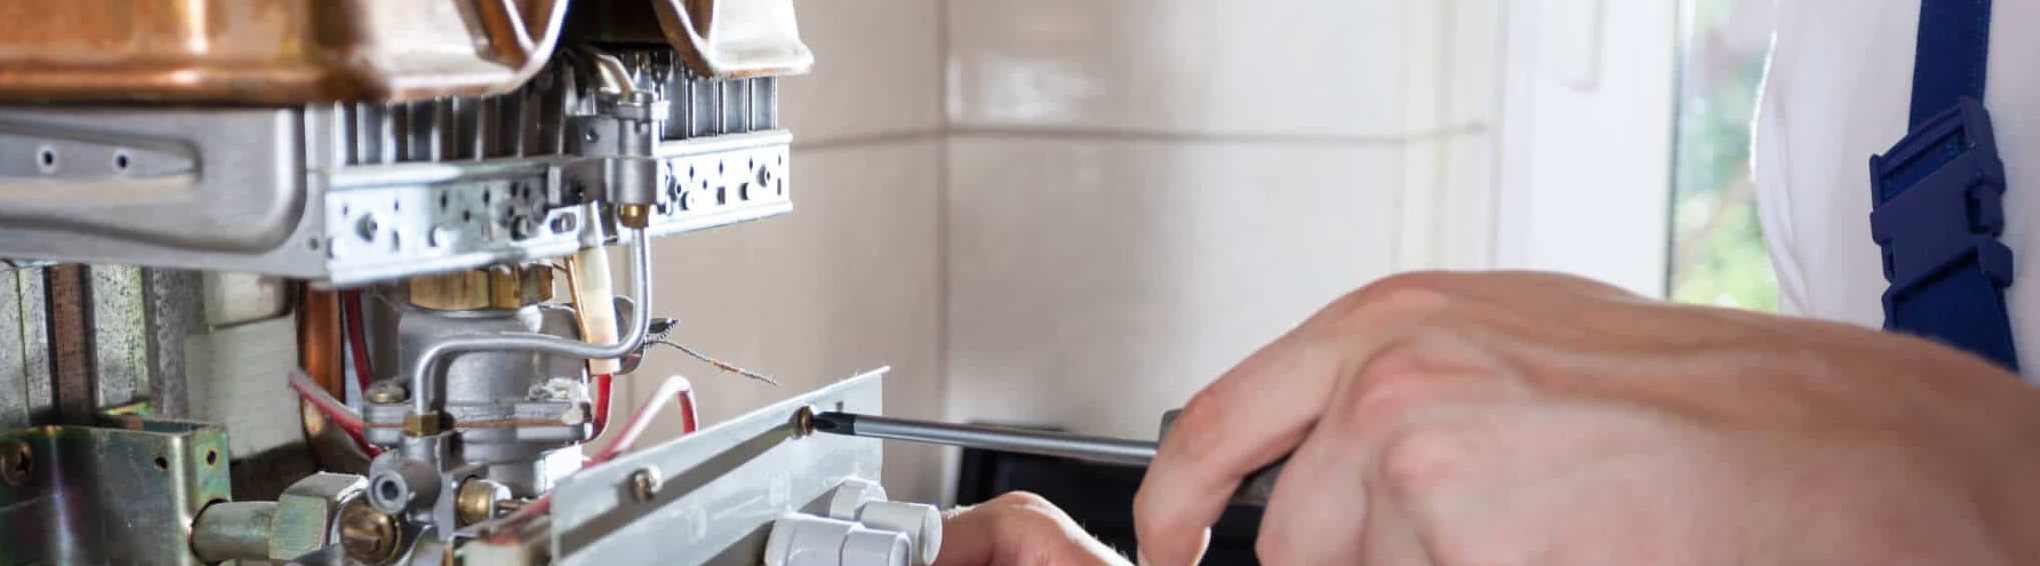 do hot water systems need servicing